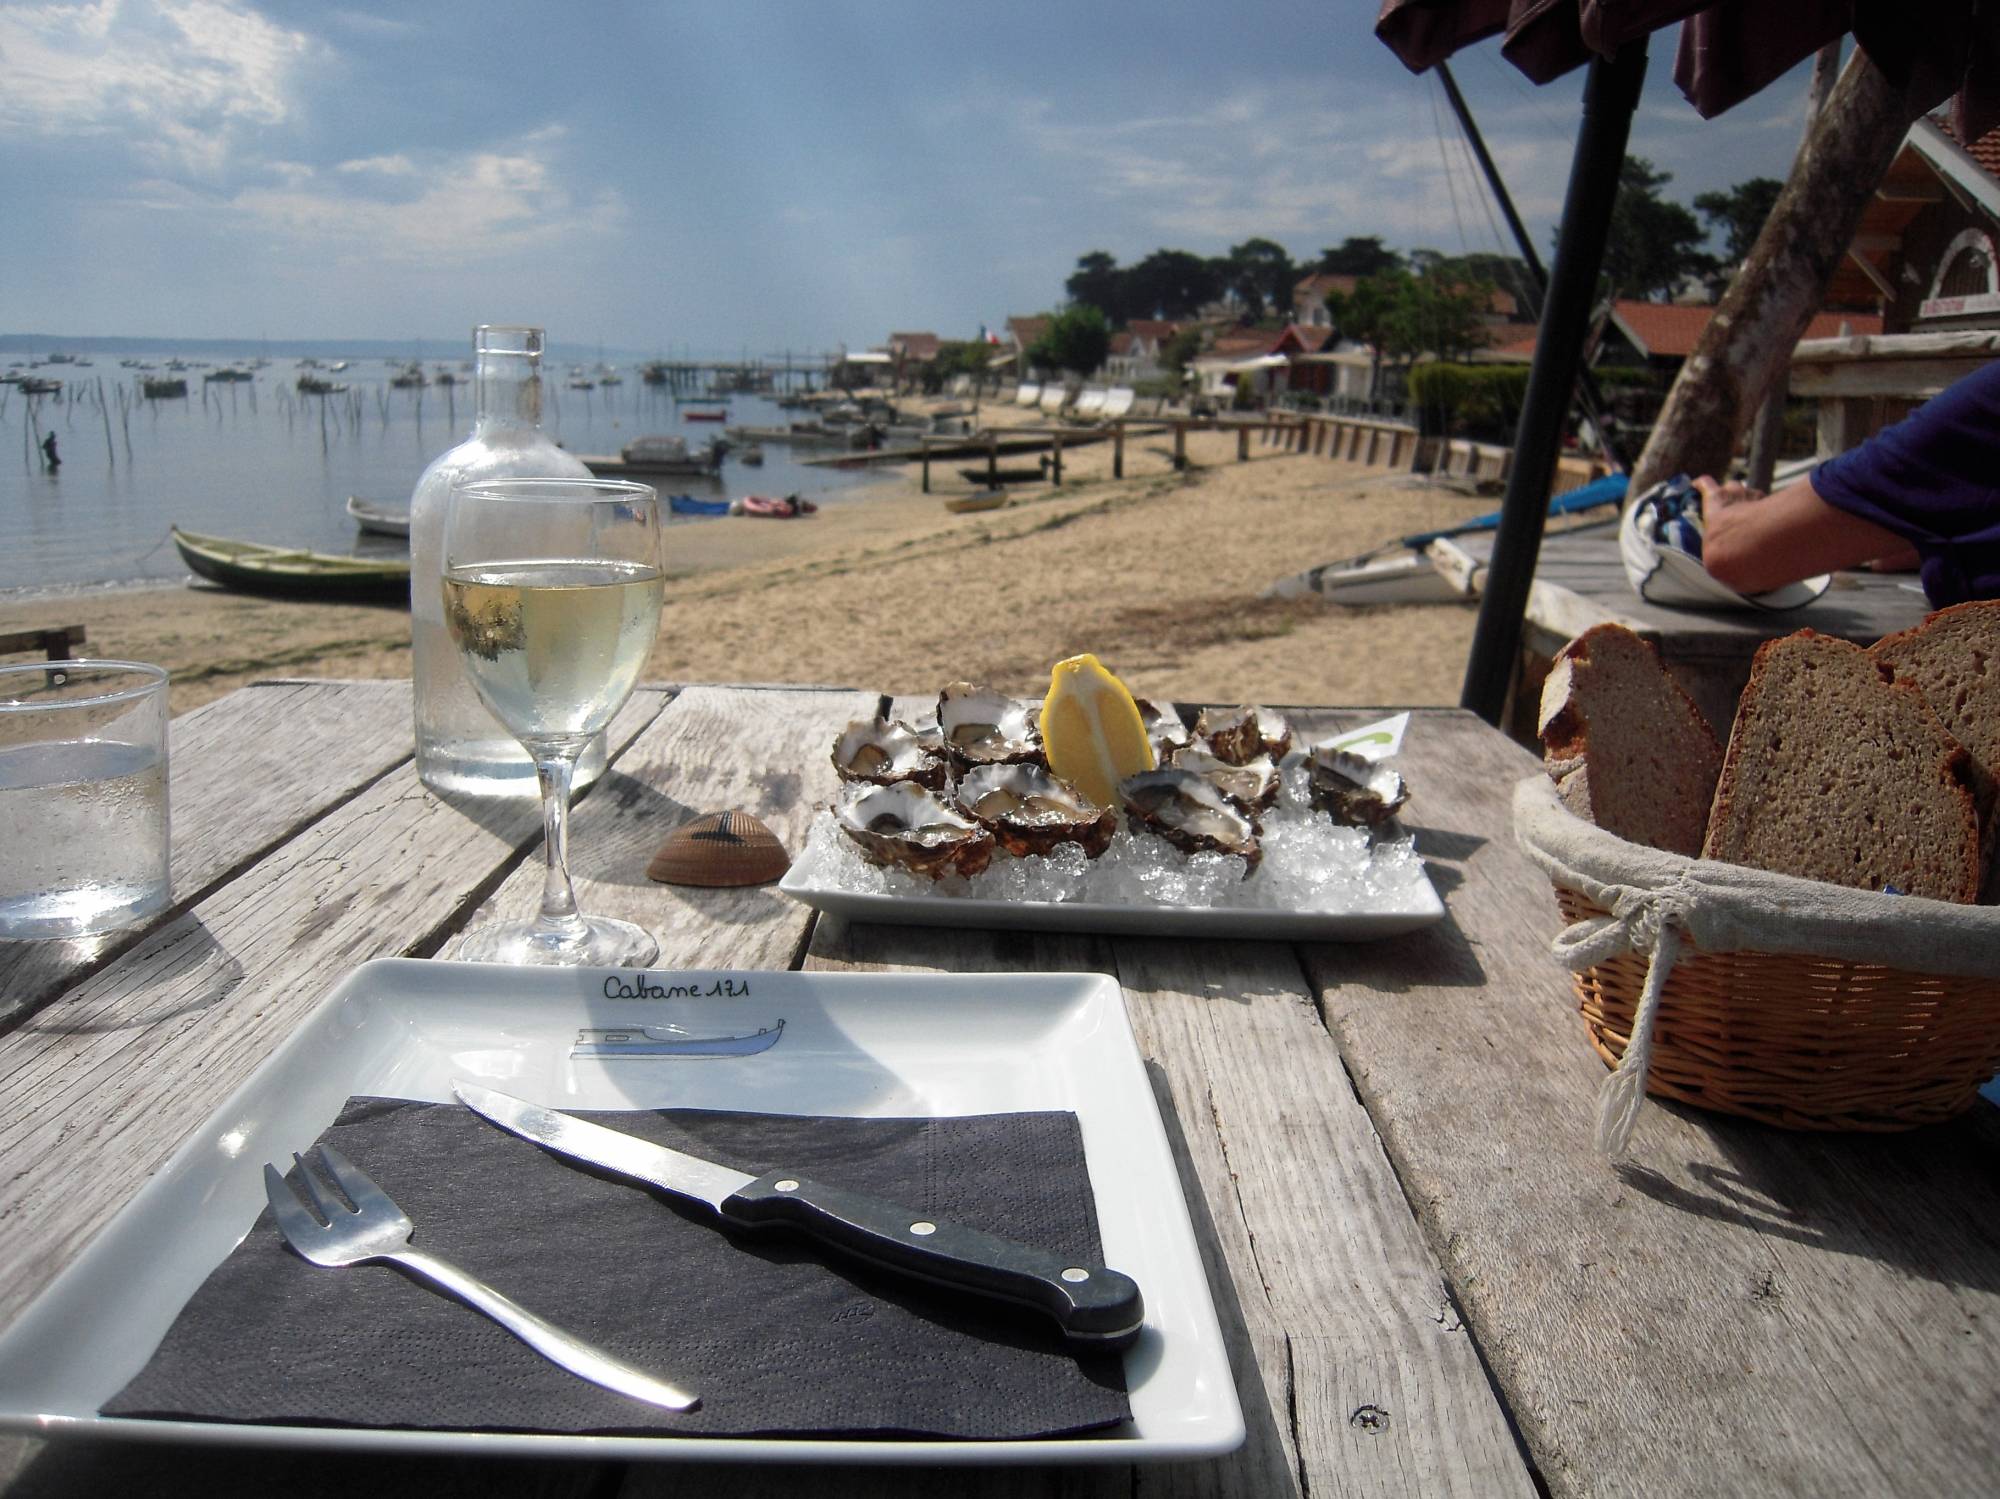 Cabins offering oysters and sea food to eat directly the beaches of the Bassin d'Arcachon